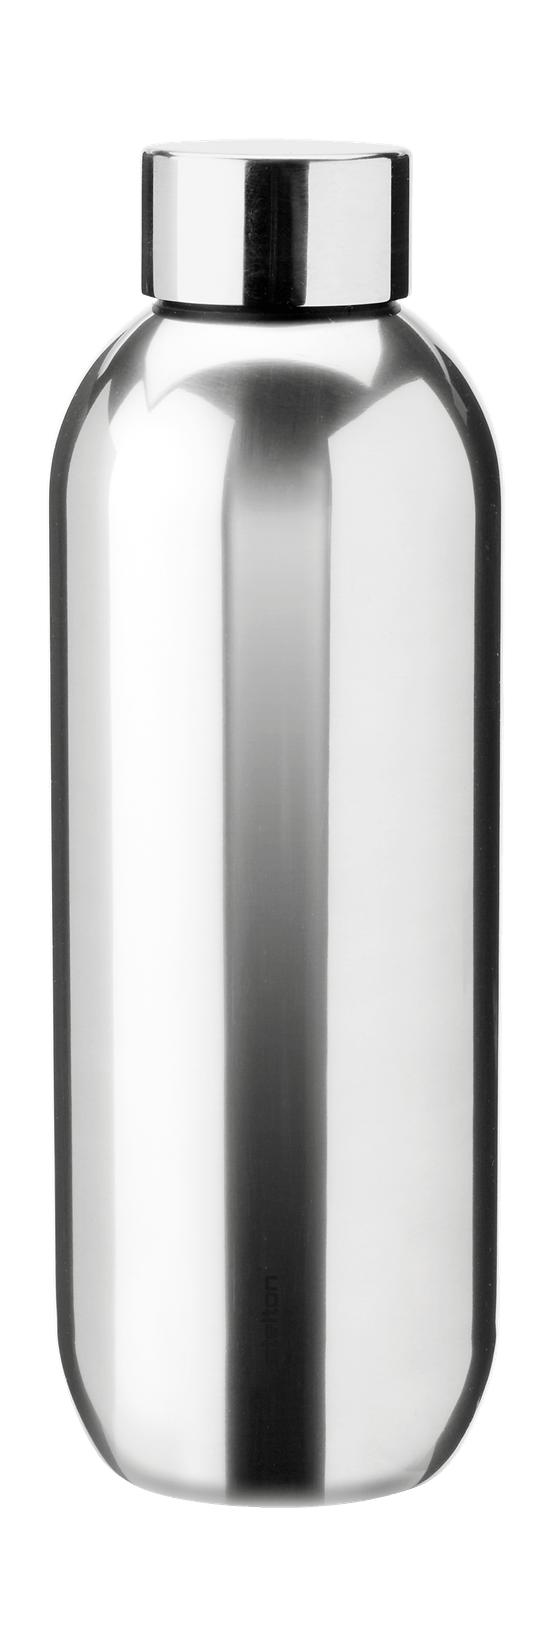 Stelton Keep Cool Thermos Butelka 0,6 L